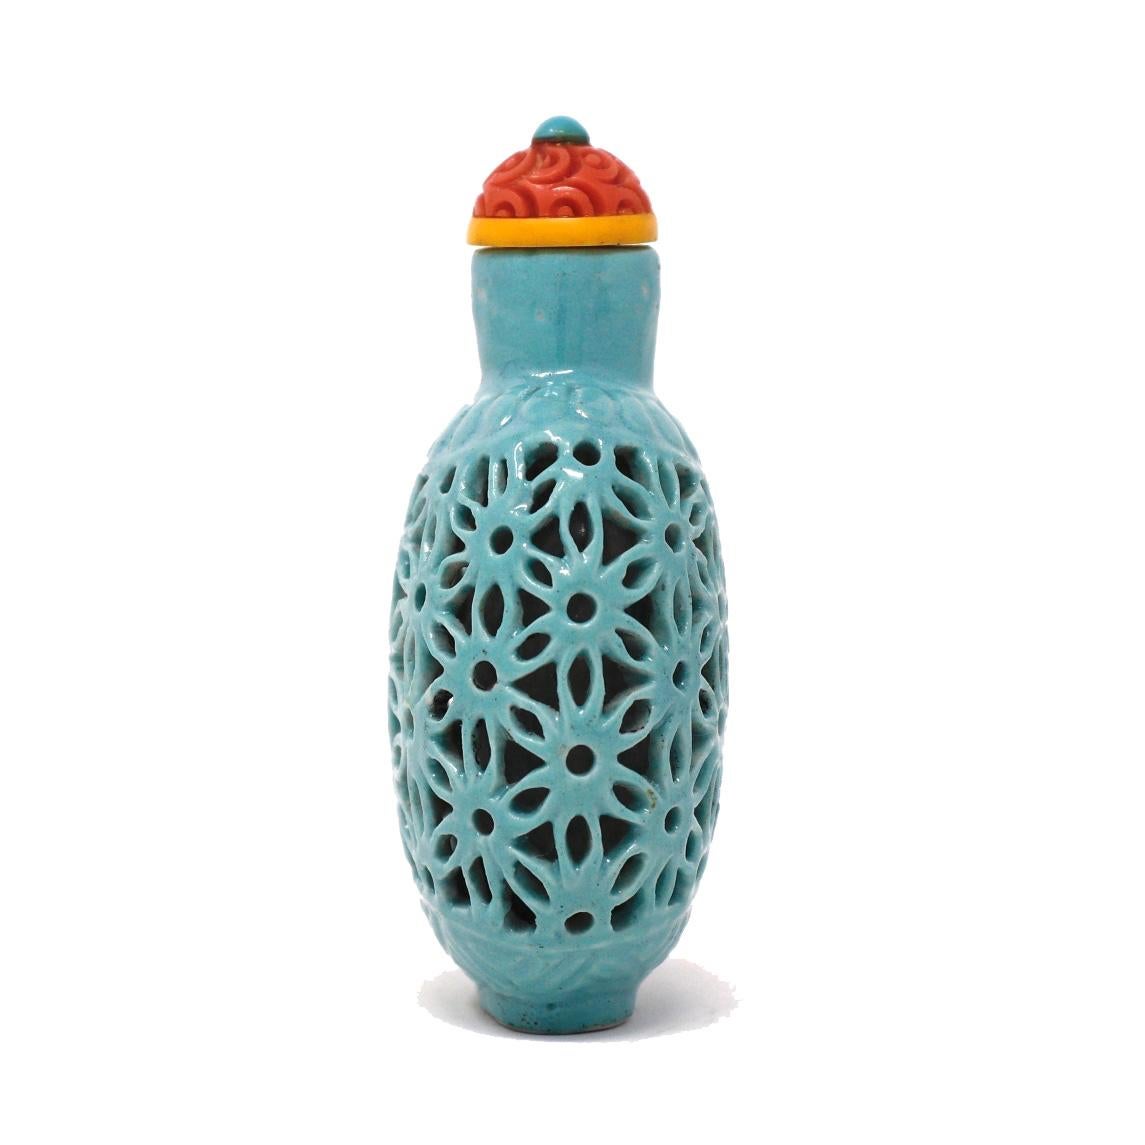 Qing Turquoise Blue Chinese Reticulated Soft Paste Porcelain Snuff Bottle, circa 1900